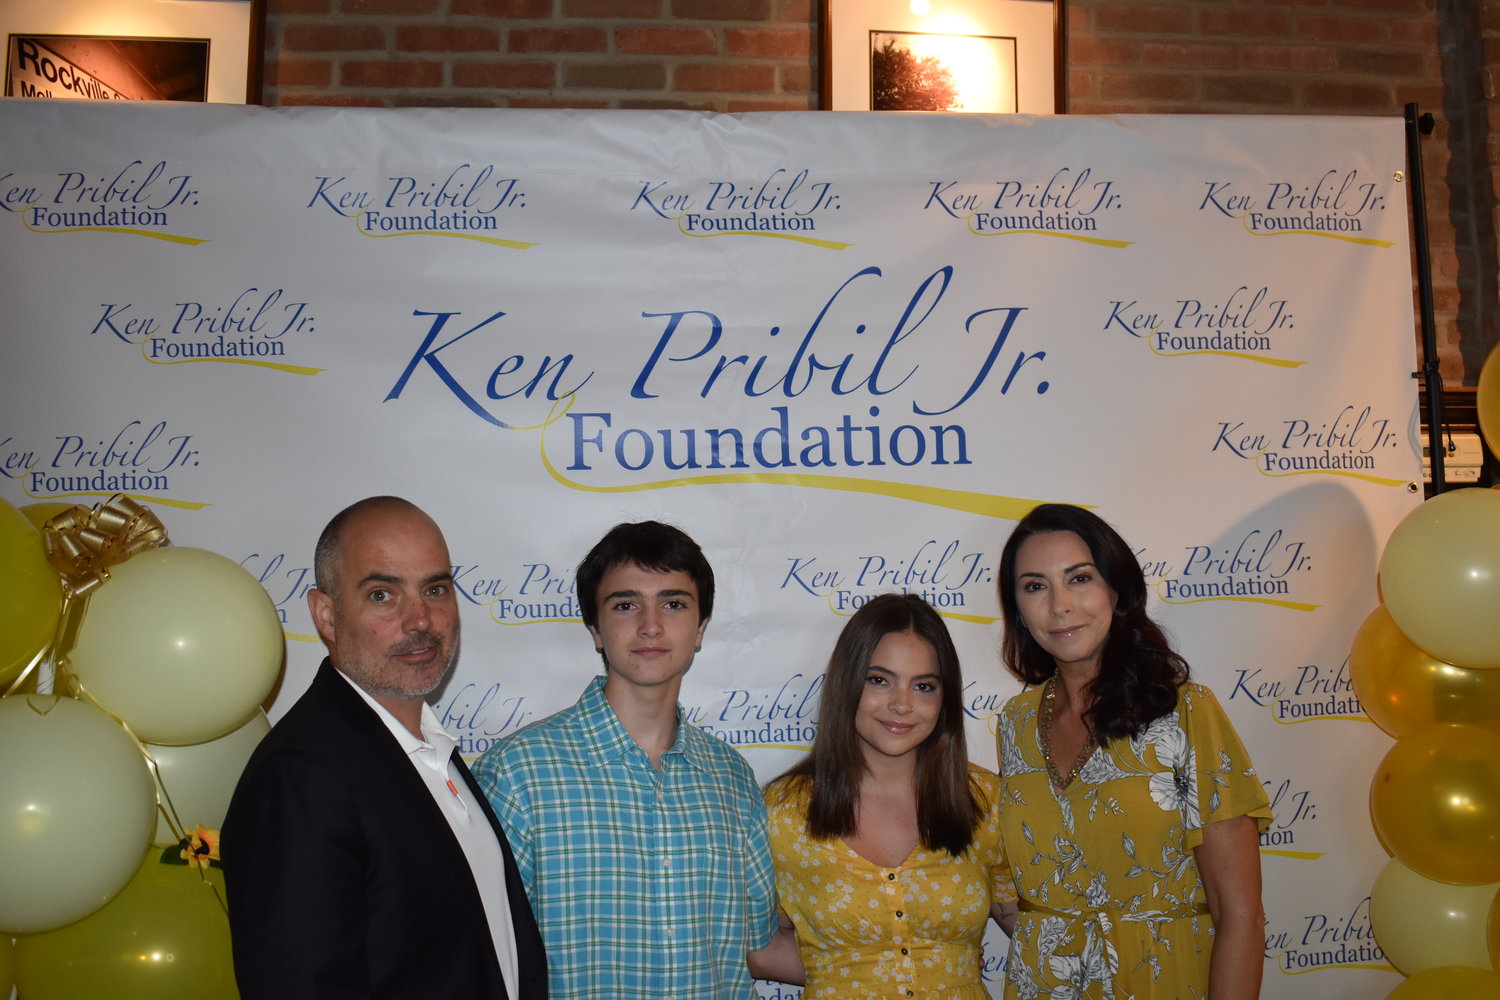 The Ken Pribil Jr. Foundation raised $10,000 at its Cocktails & Belmont III event on Saturday to fund cancer research.